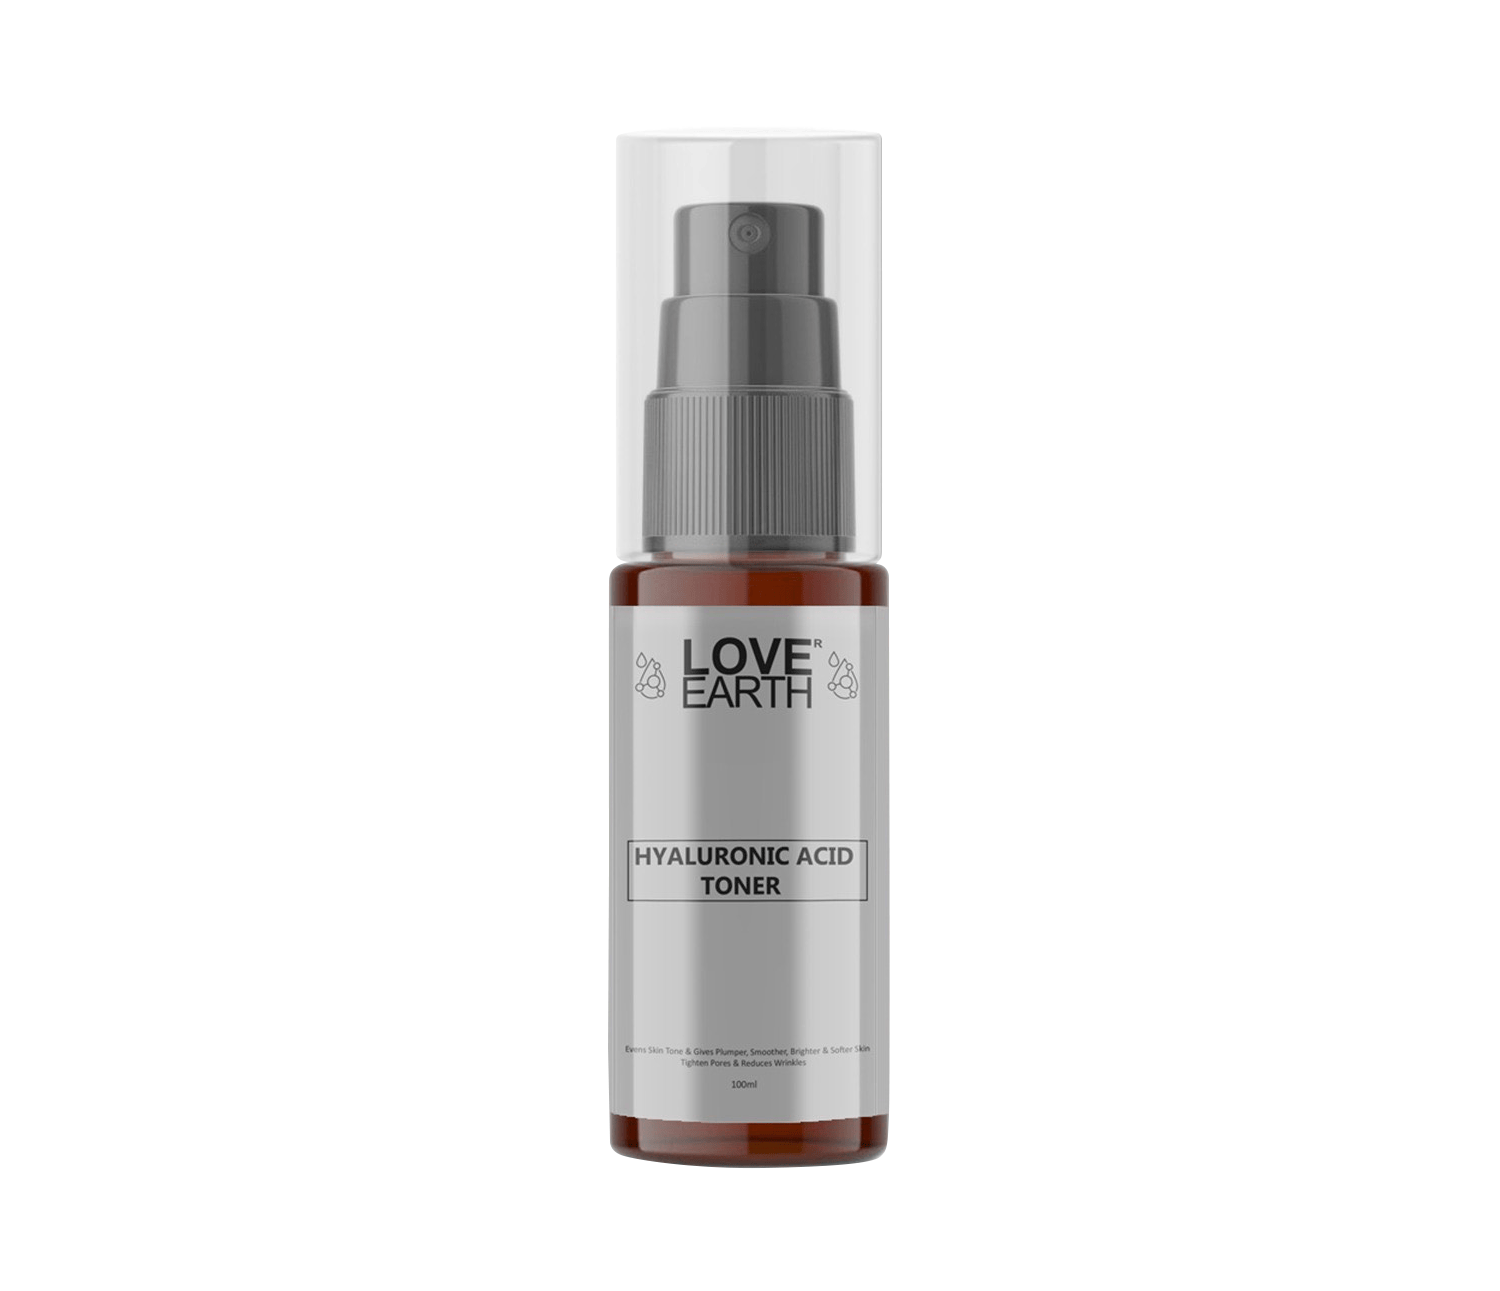 LOVE EARTH | Love Earth Hyaluronic Acid Toner with Grape seed extract and Hyaluronic Acid for Wrinkle Free, Smooth and Glowing Skin 100ml